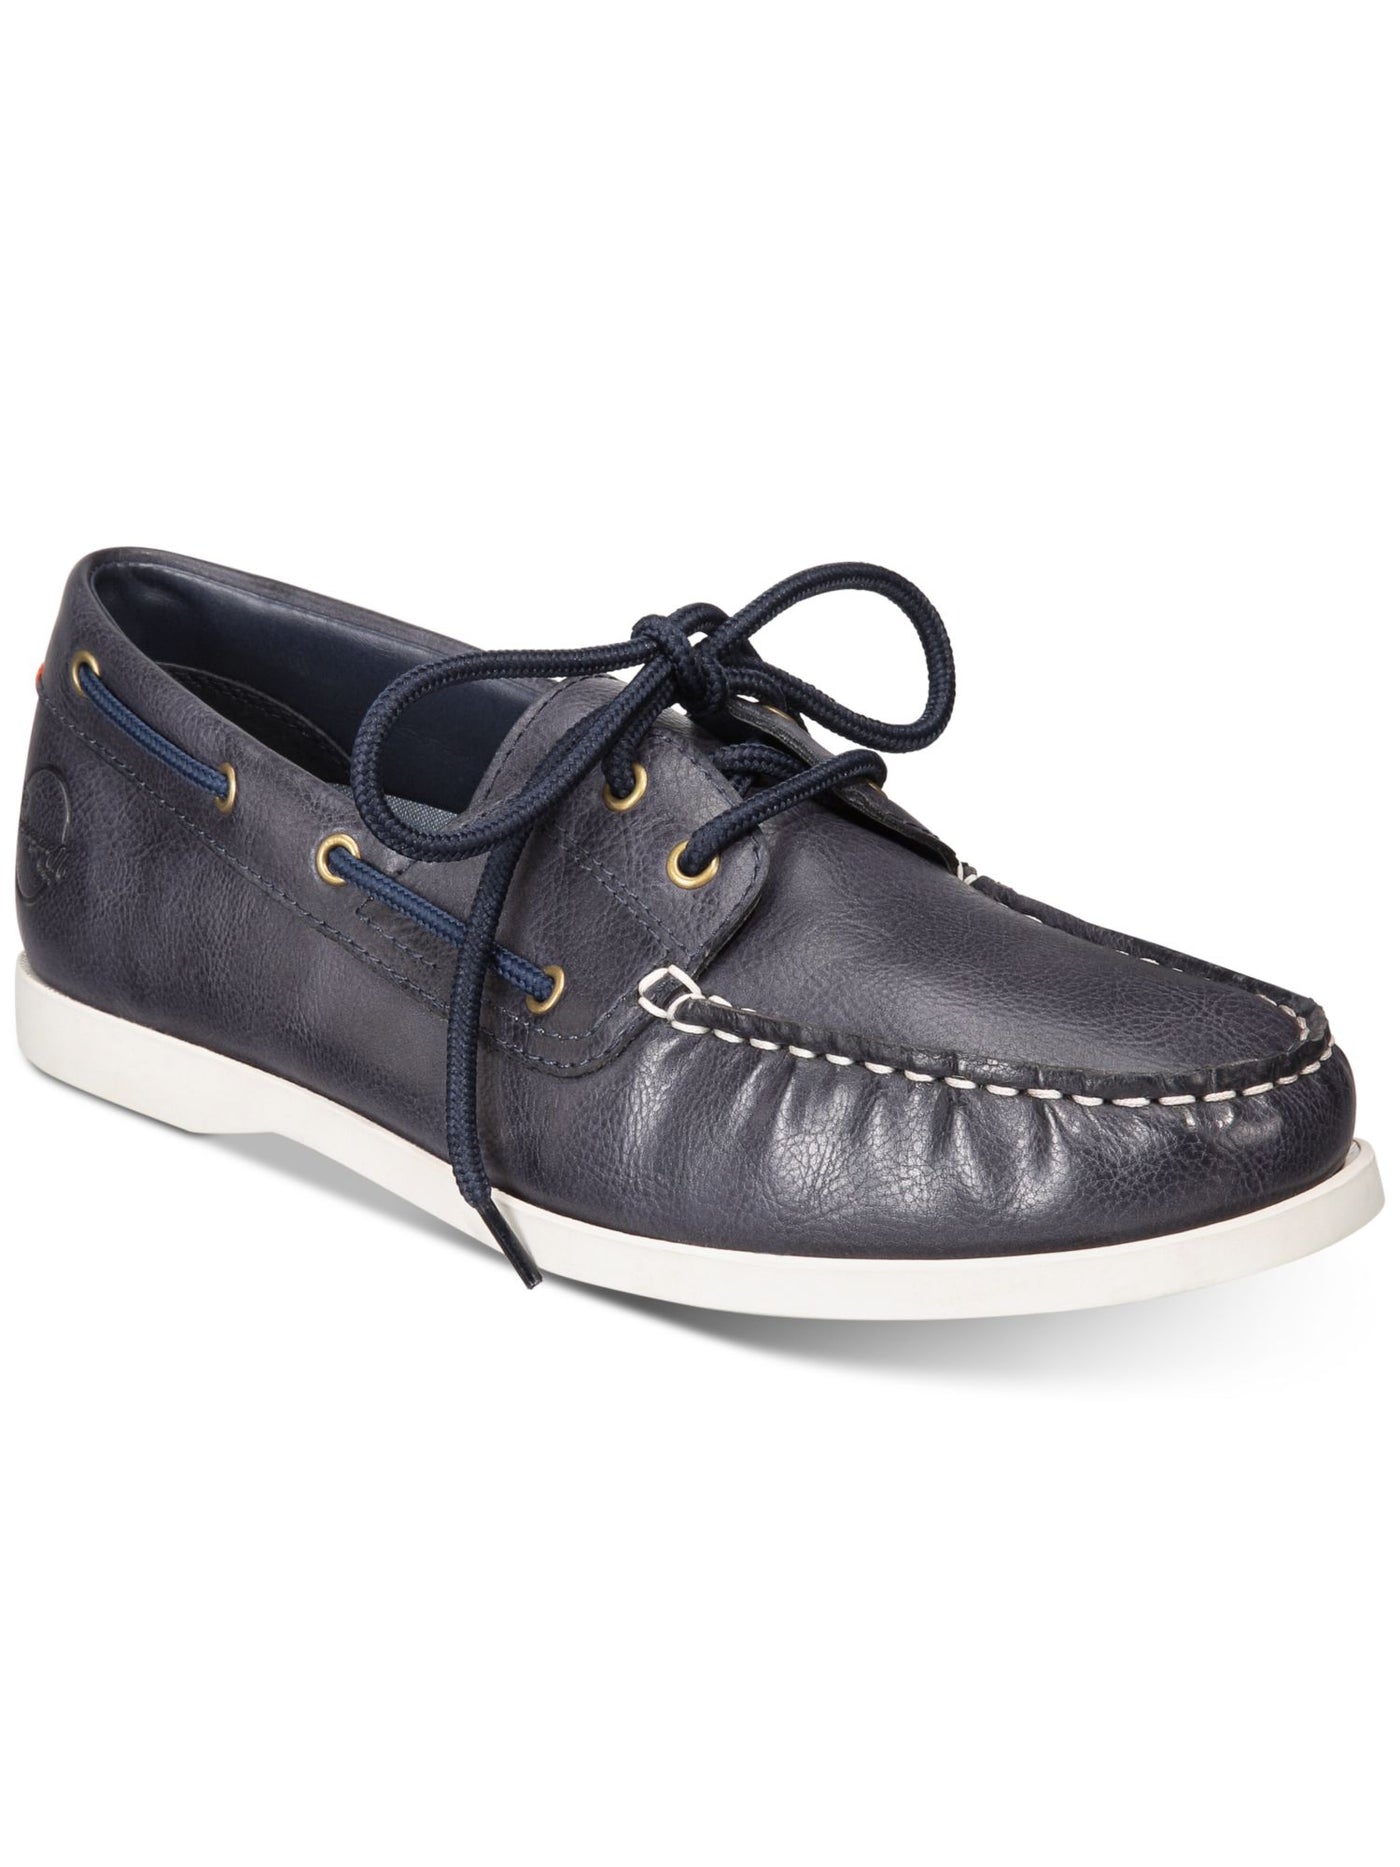 WEATHERPROOF VINTAGE Mens Navy Cushioned Benny Round Toe Lace-Up Boat Shoes 13 M